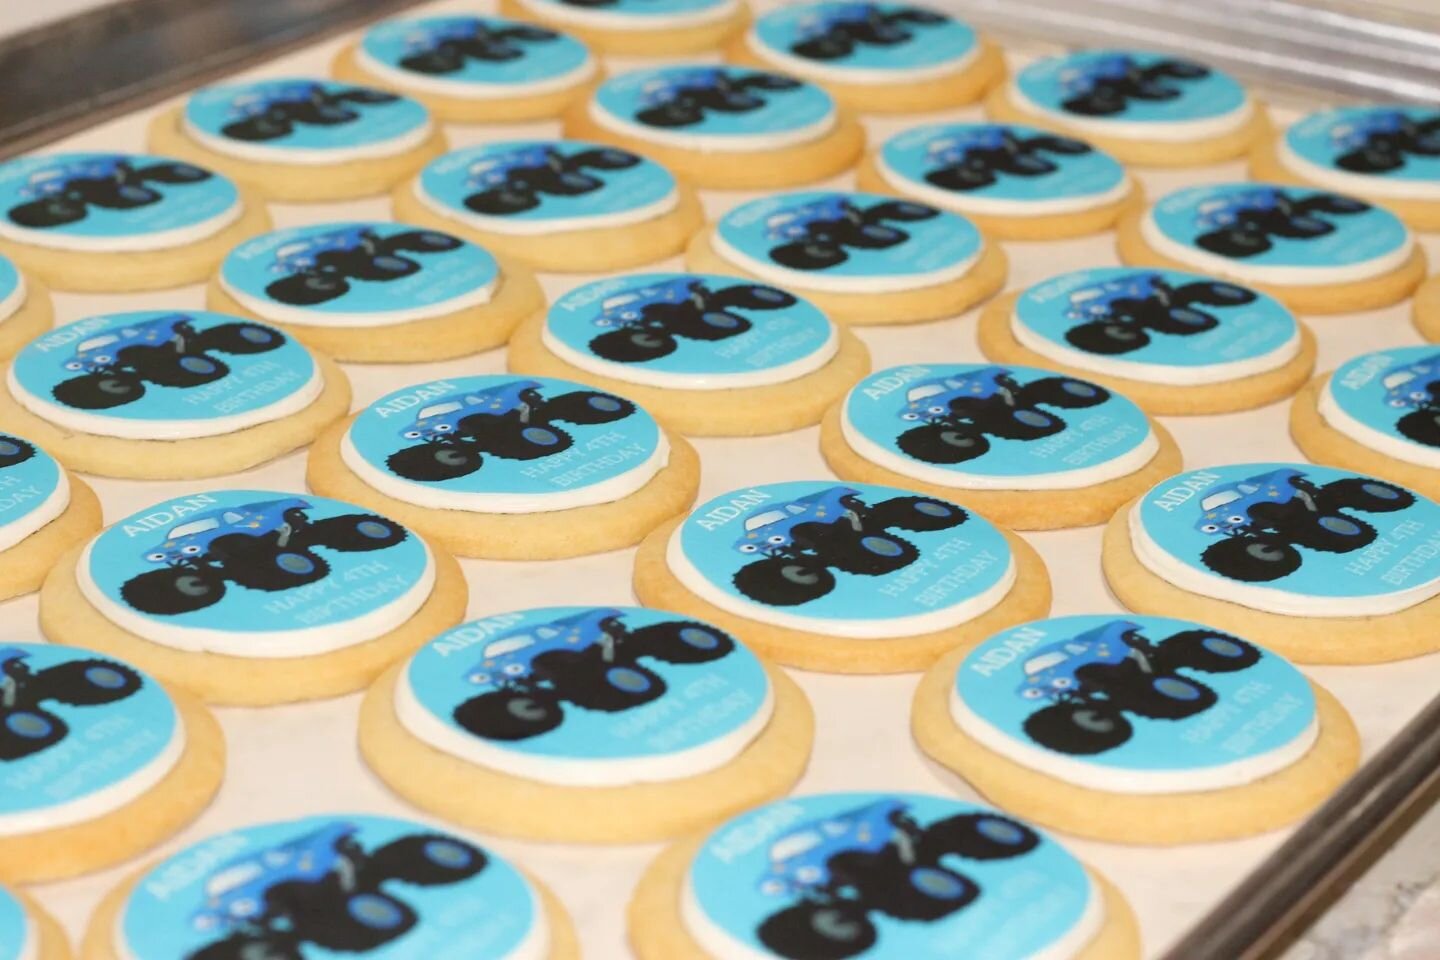 Who doesn't like rows and rows of sugar cookies for their birthday? Add a blue monster truck and we will have a smashing good time with lots of Pun!! 

Okay Okay, no more jokes.  Happy Birthday!!!! 

#puns #dadjoke #baker #jupiterflorida #jupiterfarm